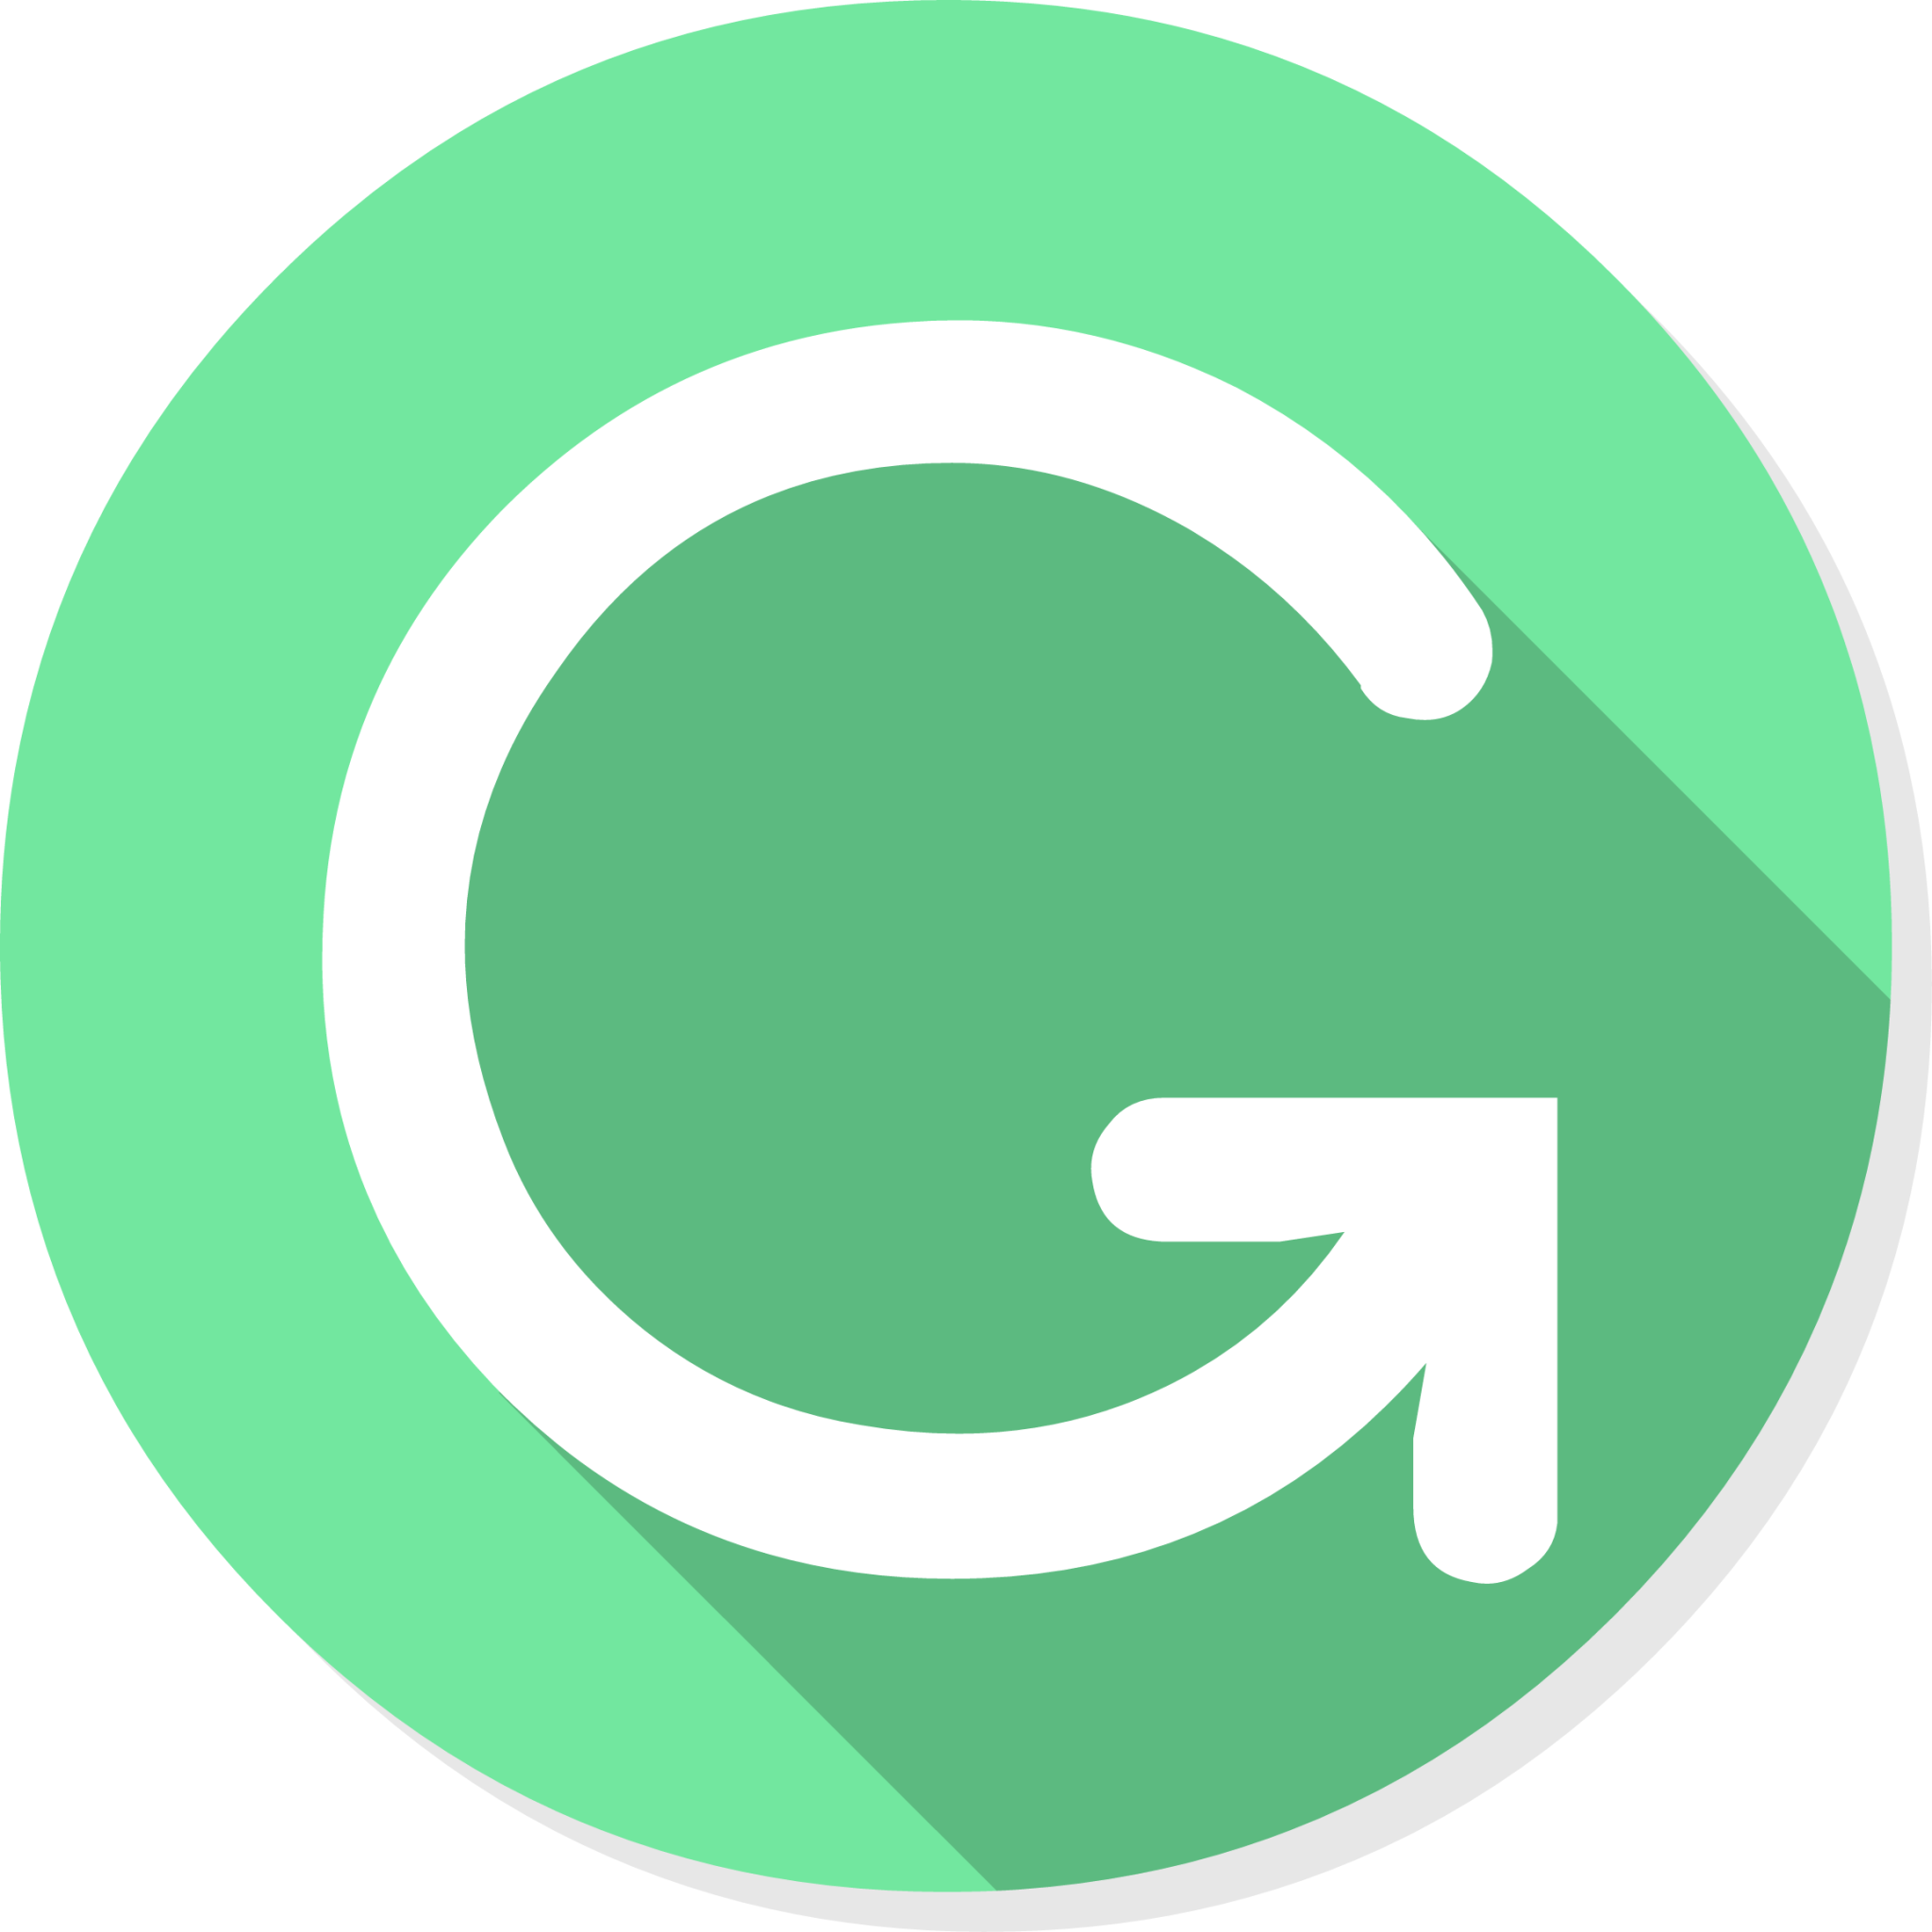 Apps Grammarly icon